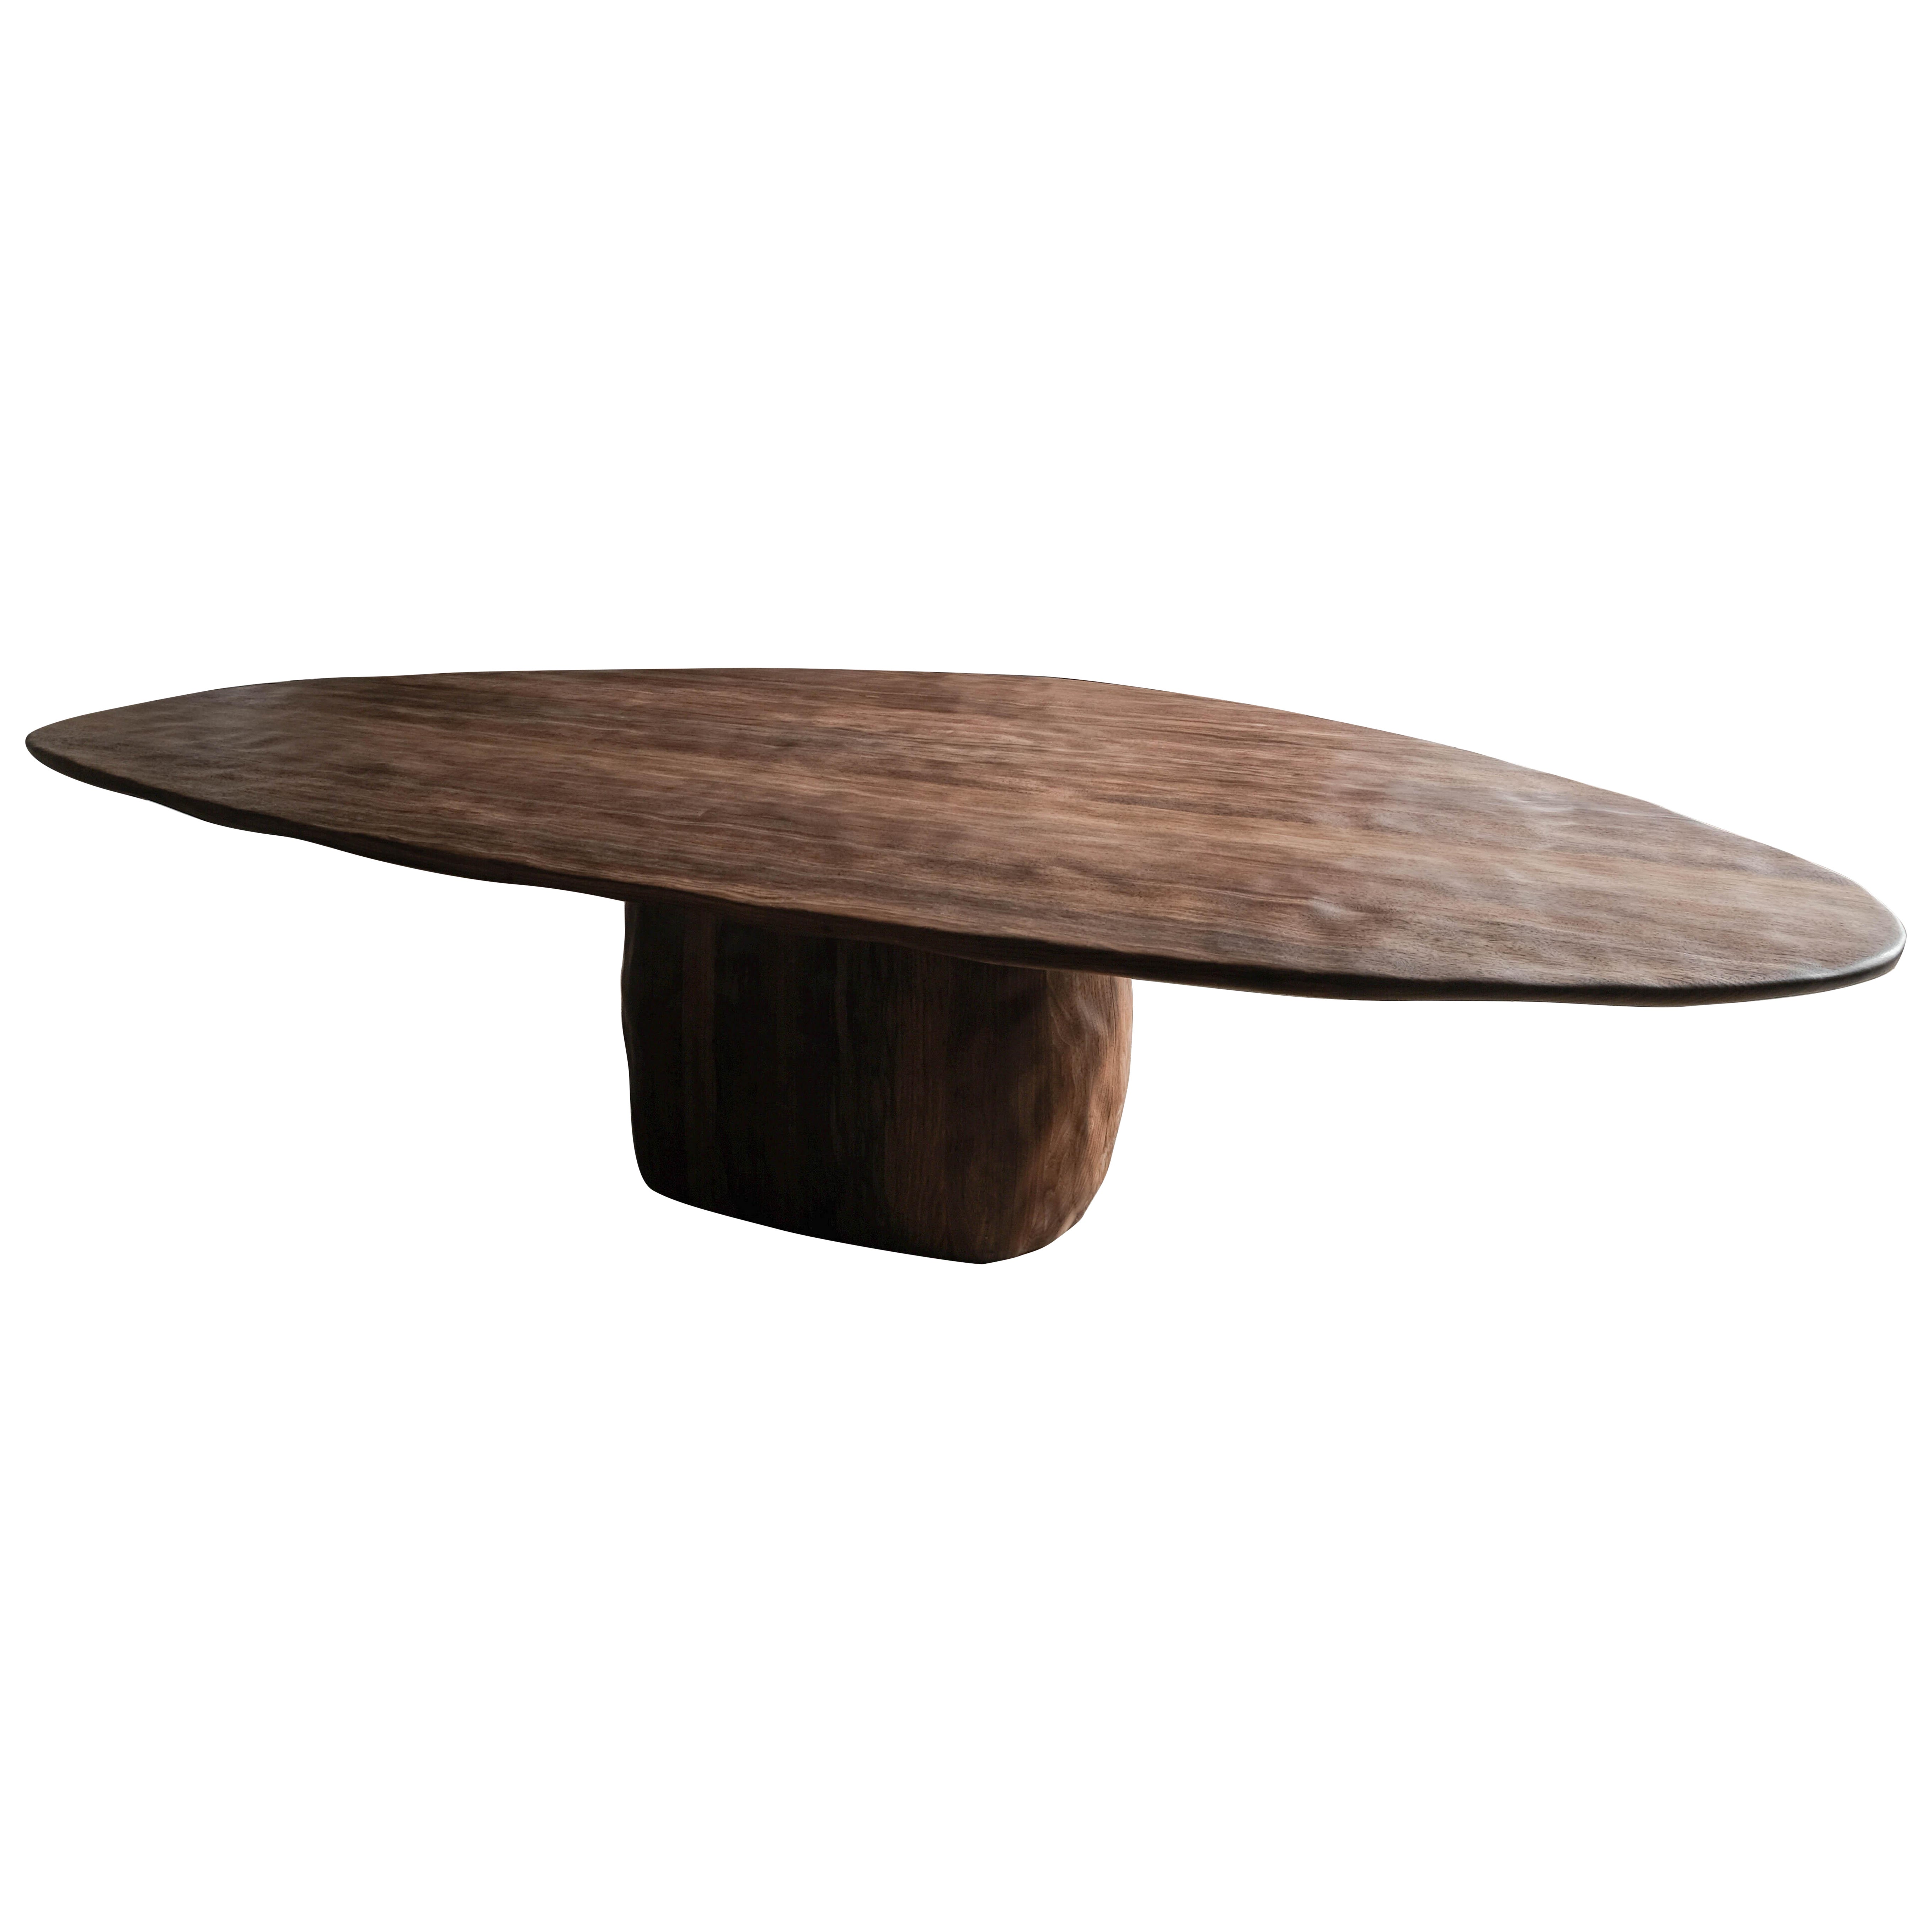 Vintage Wood Dining Table by Atelier Benoit Viaene For Sale